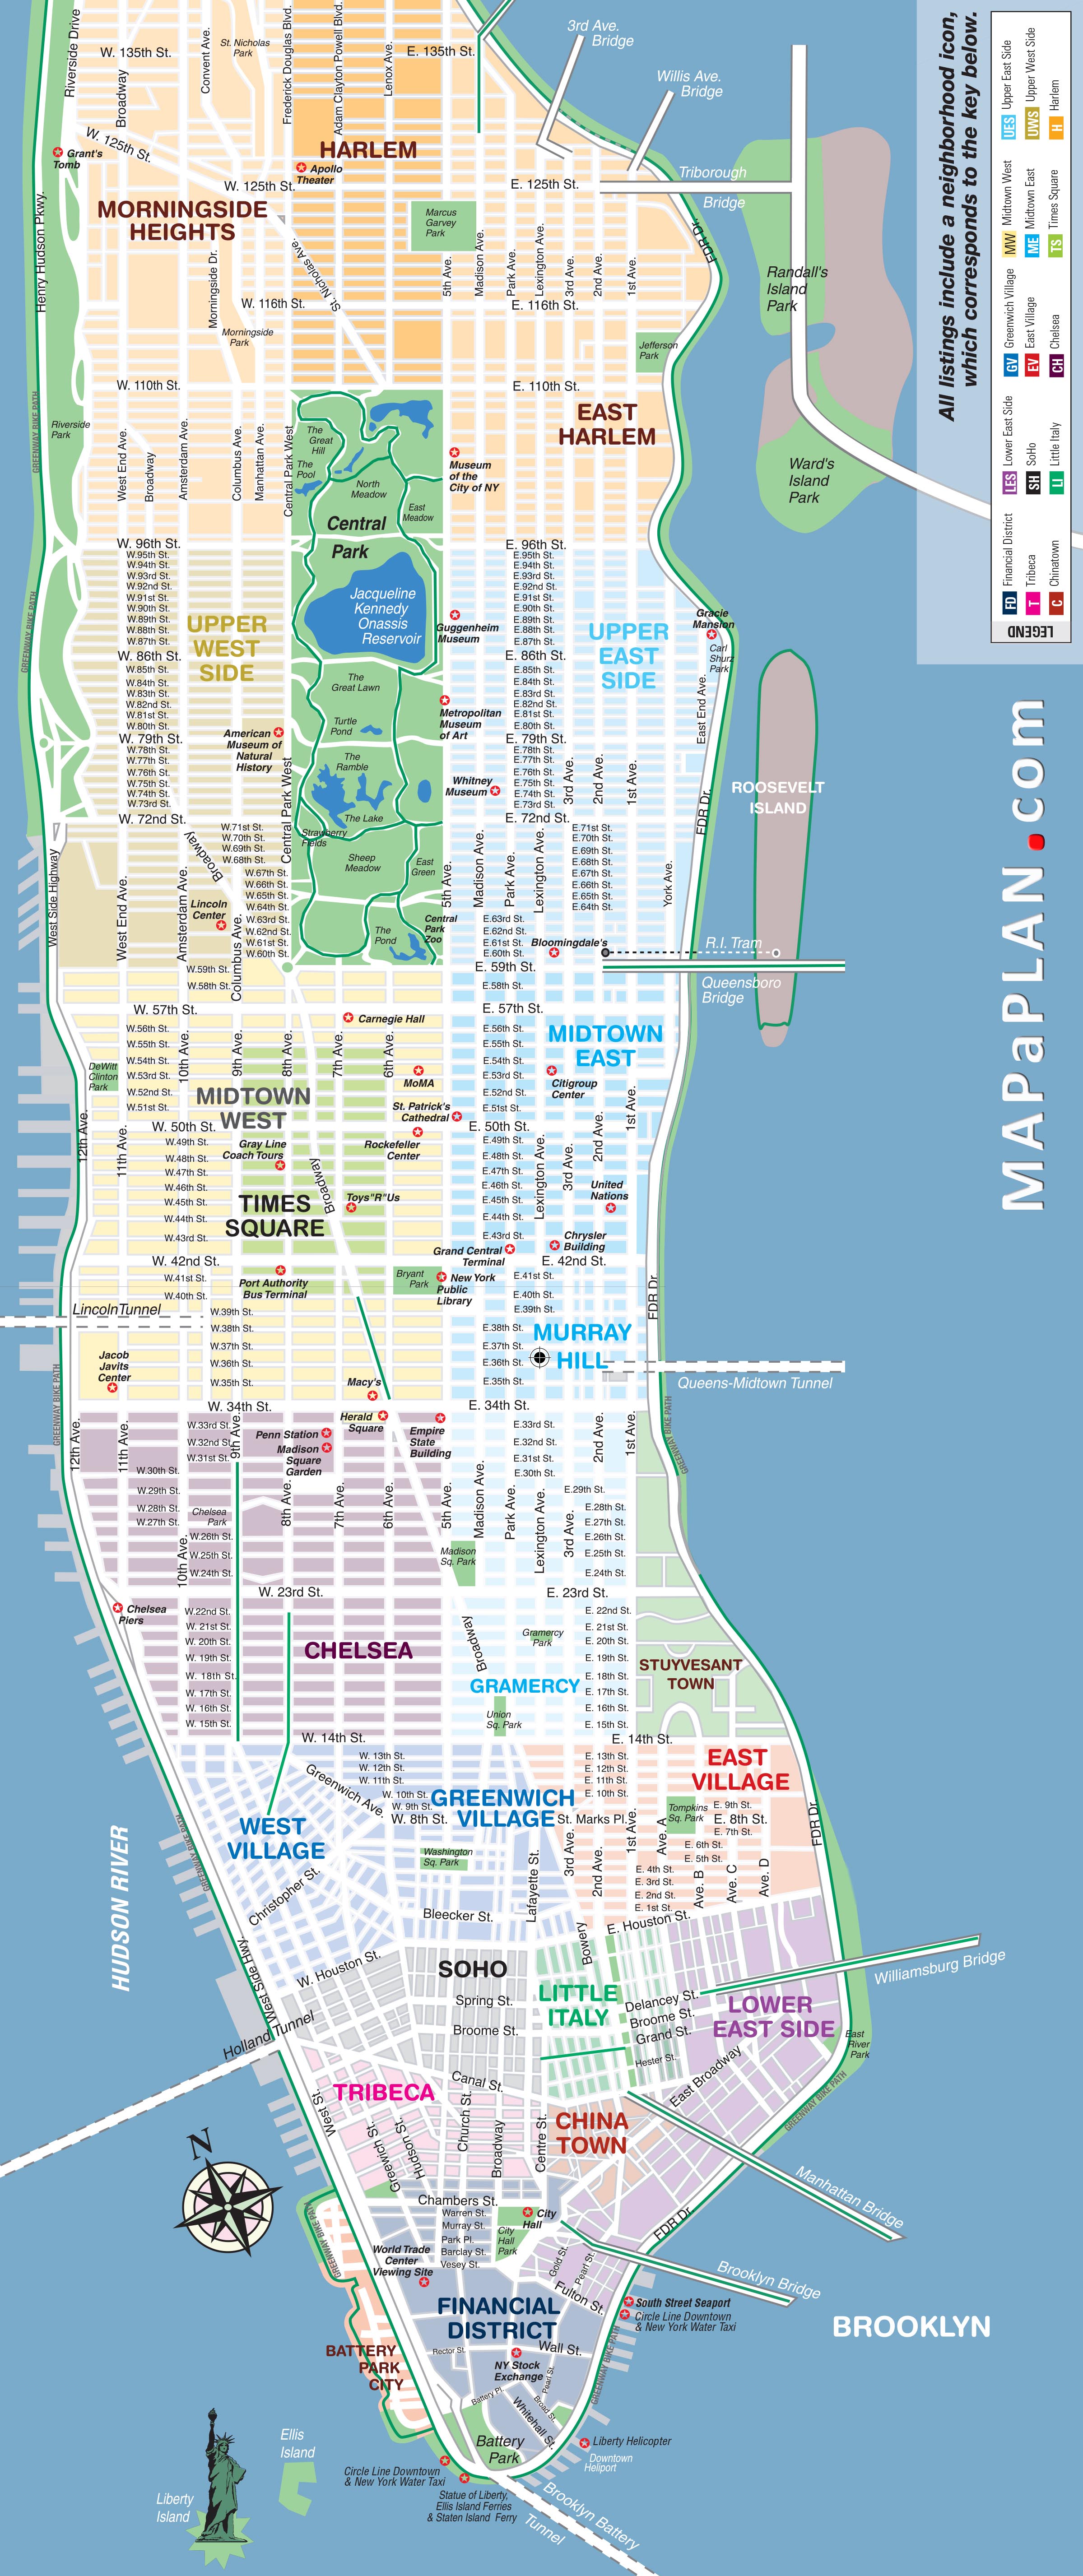 Locations to visit in three days - New York map